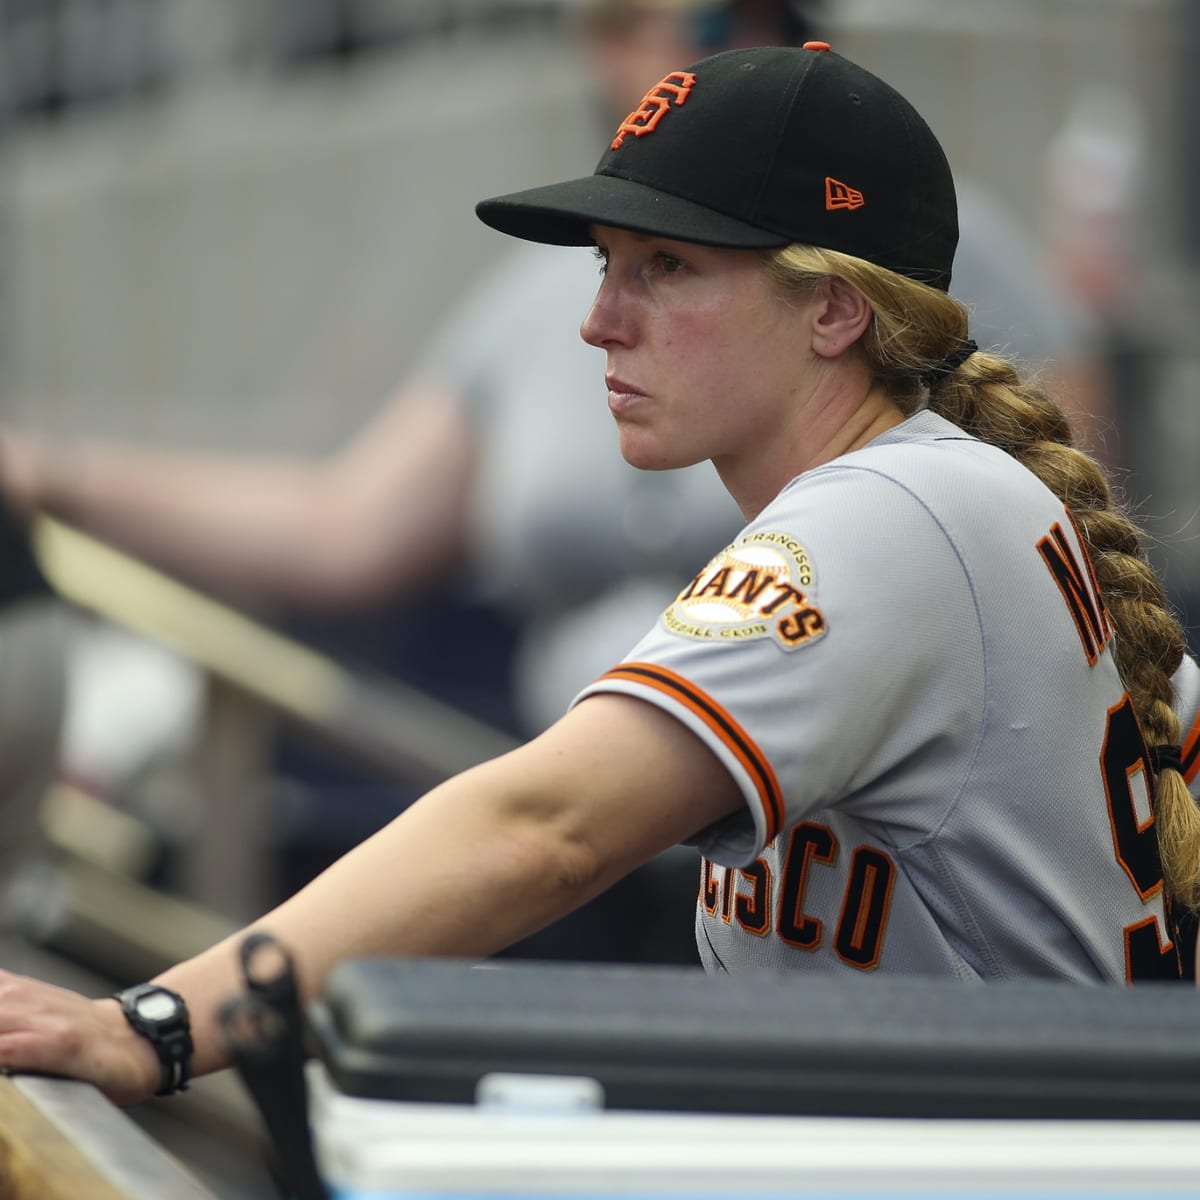 San Francisco Giants Make History By Becoming The First MLB Team